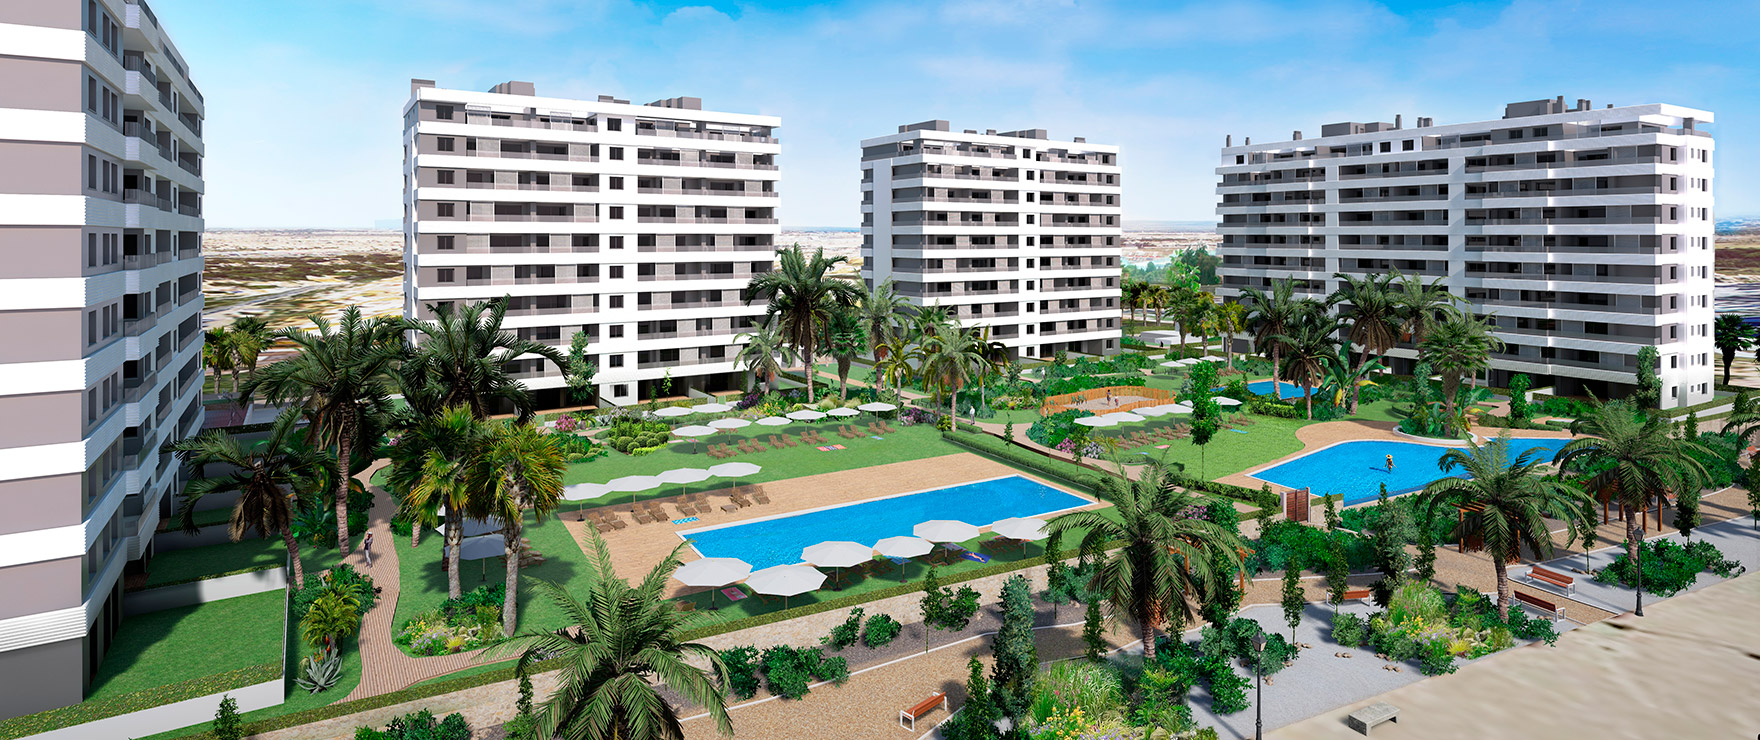 Panorama Mar: new apartments with swimming pools and communal garden